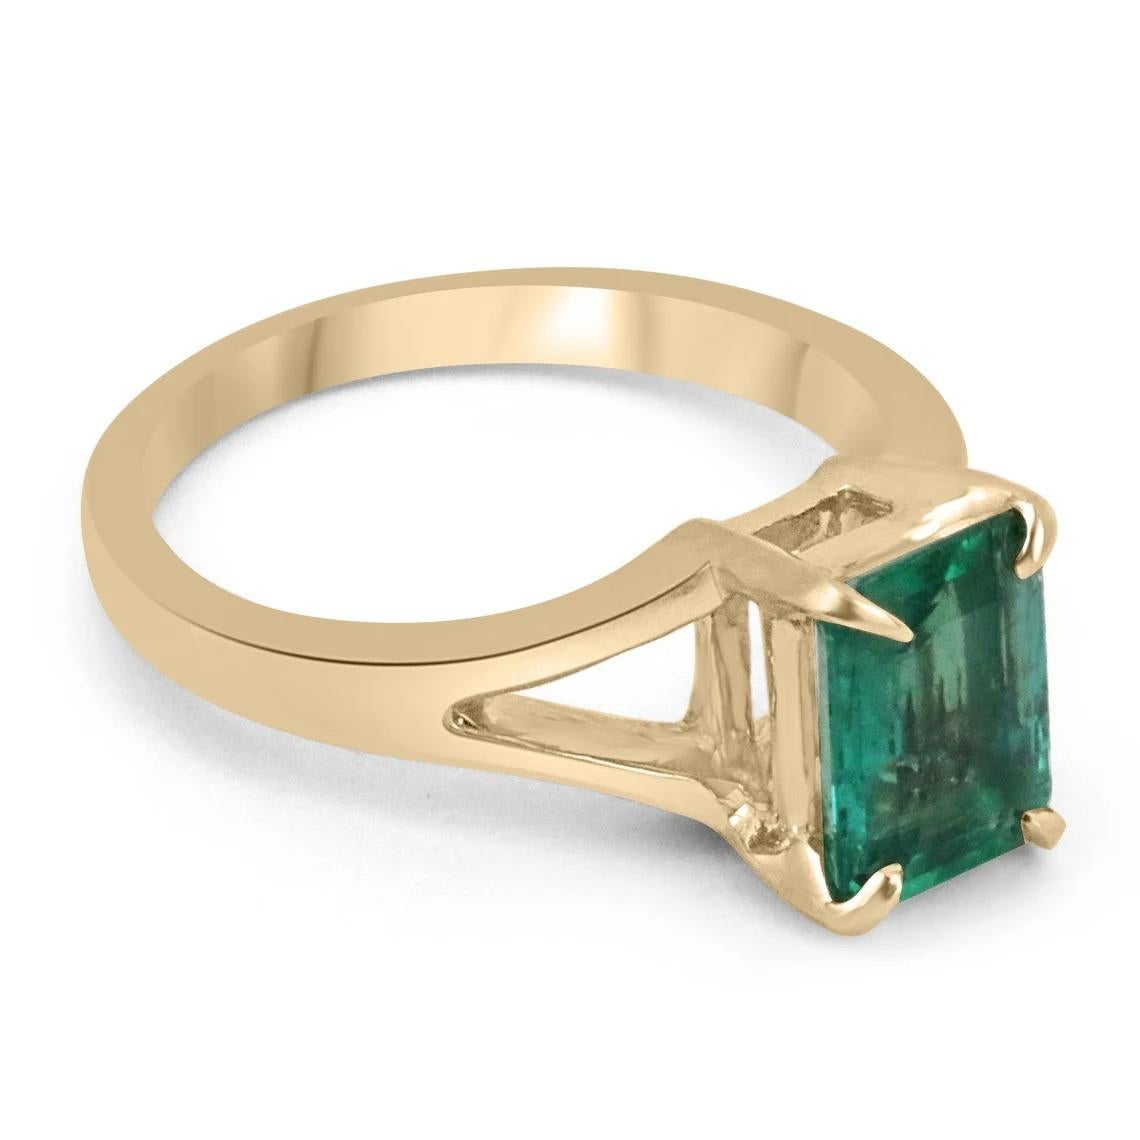 Enthrall in this stunning solitaire natural emerald ring. The gemstone showcases a fine quality Zambian emerald cut emerald with superb qualities such as excellent luster and transparency, as some of many. Set in a 14K yellow gold solitaire,